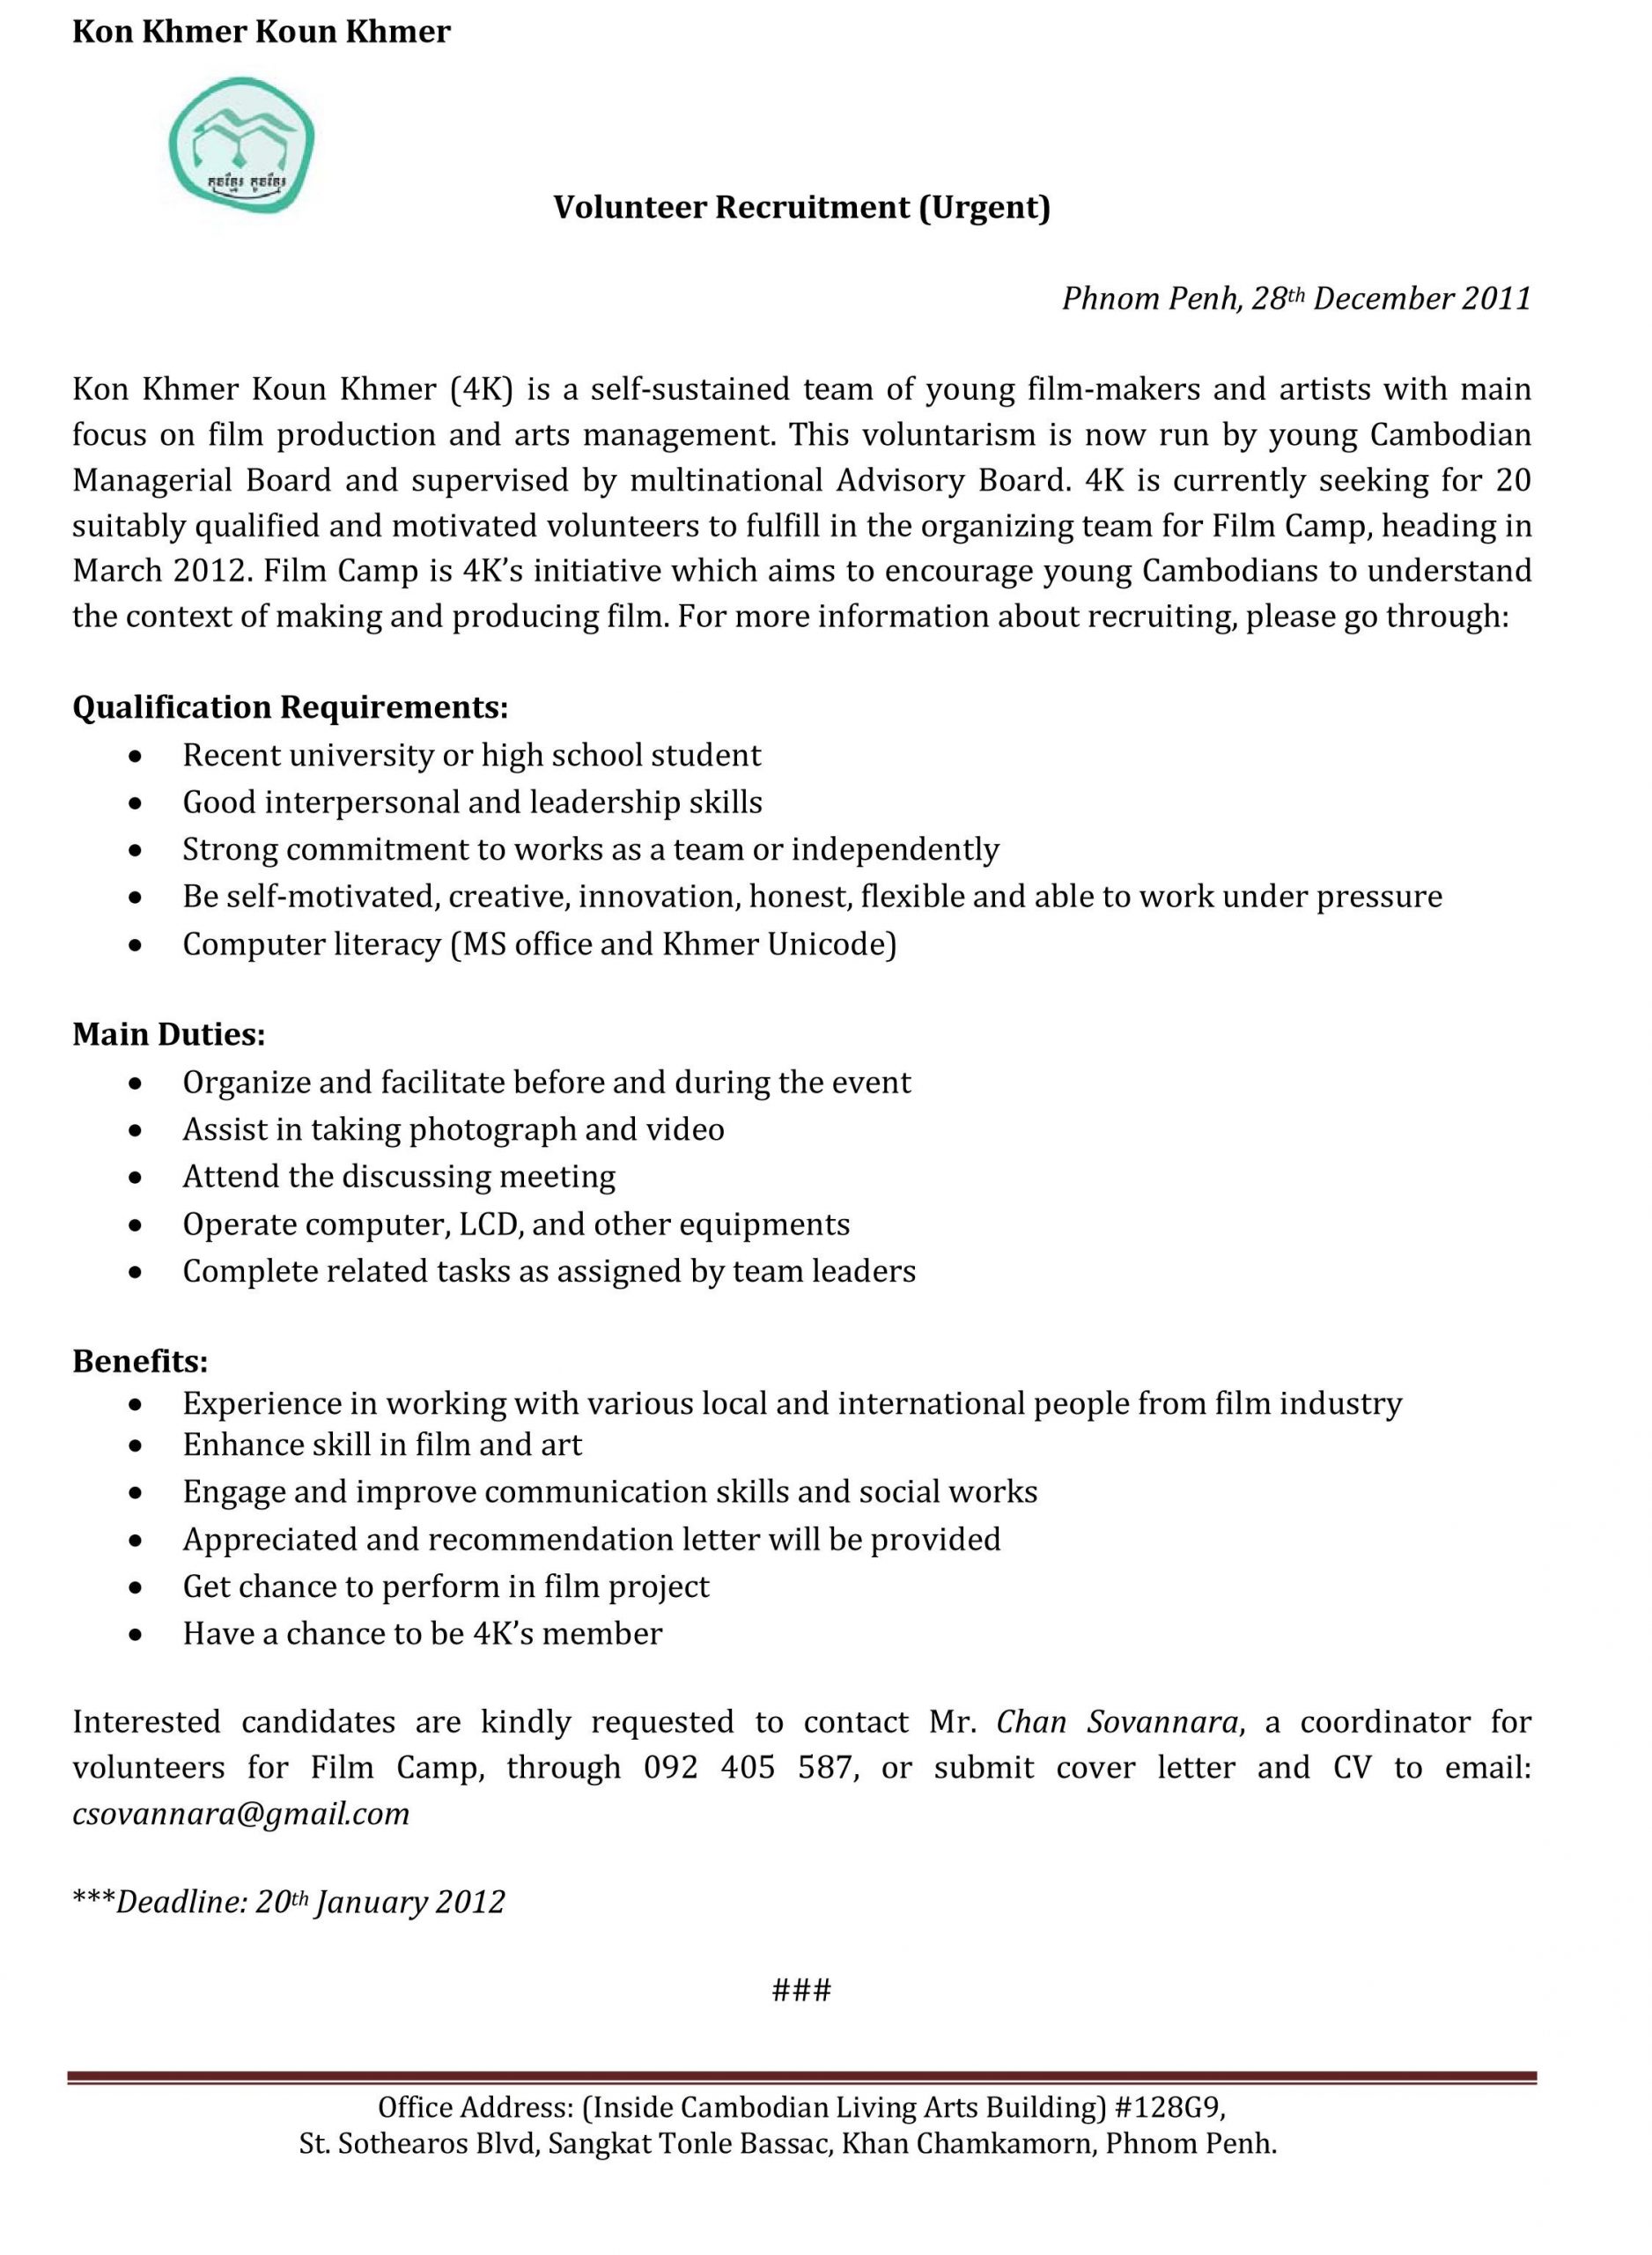 Sample Application Letter For Volunteer Position with measurements 2248 X 3067